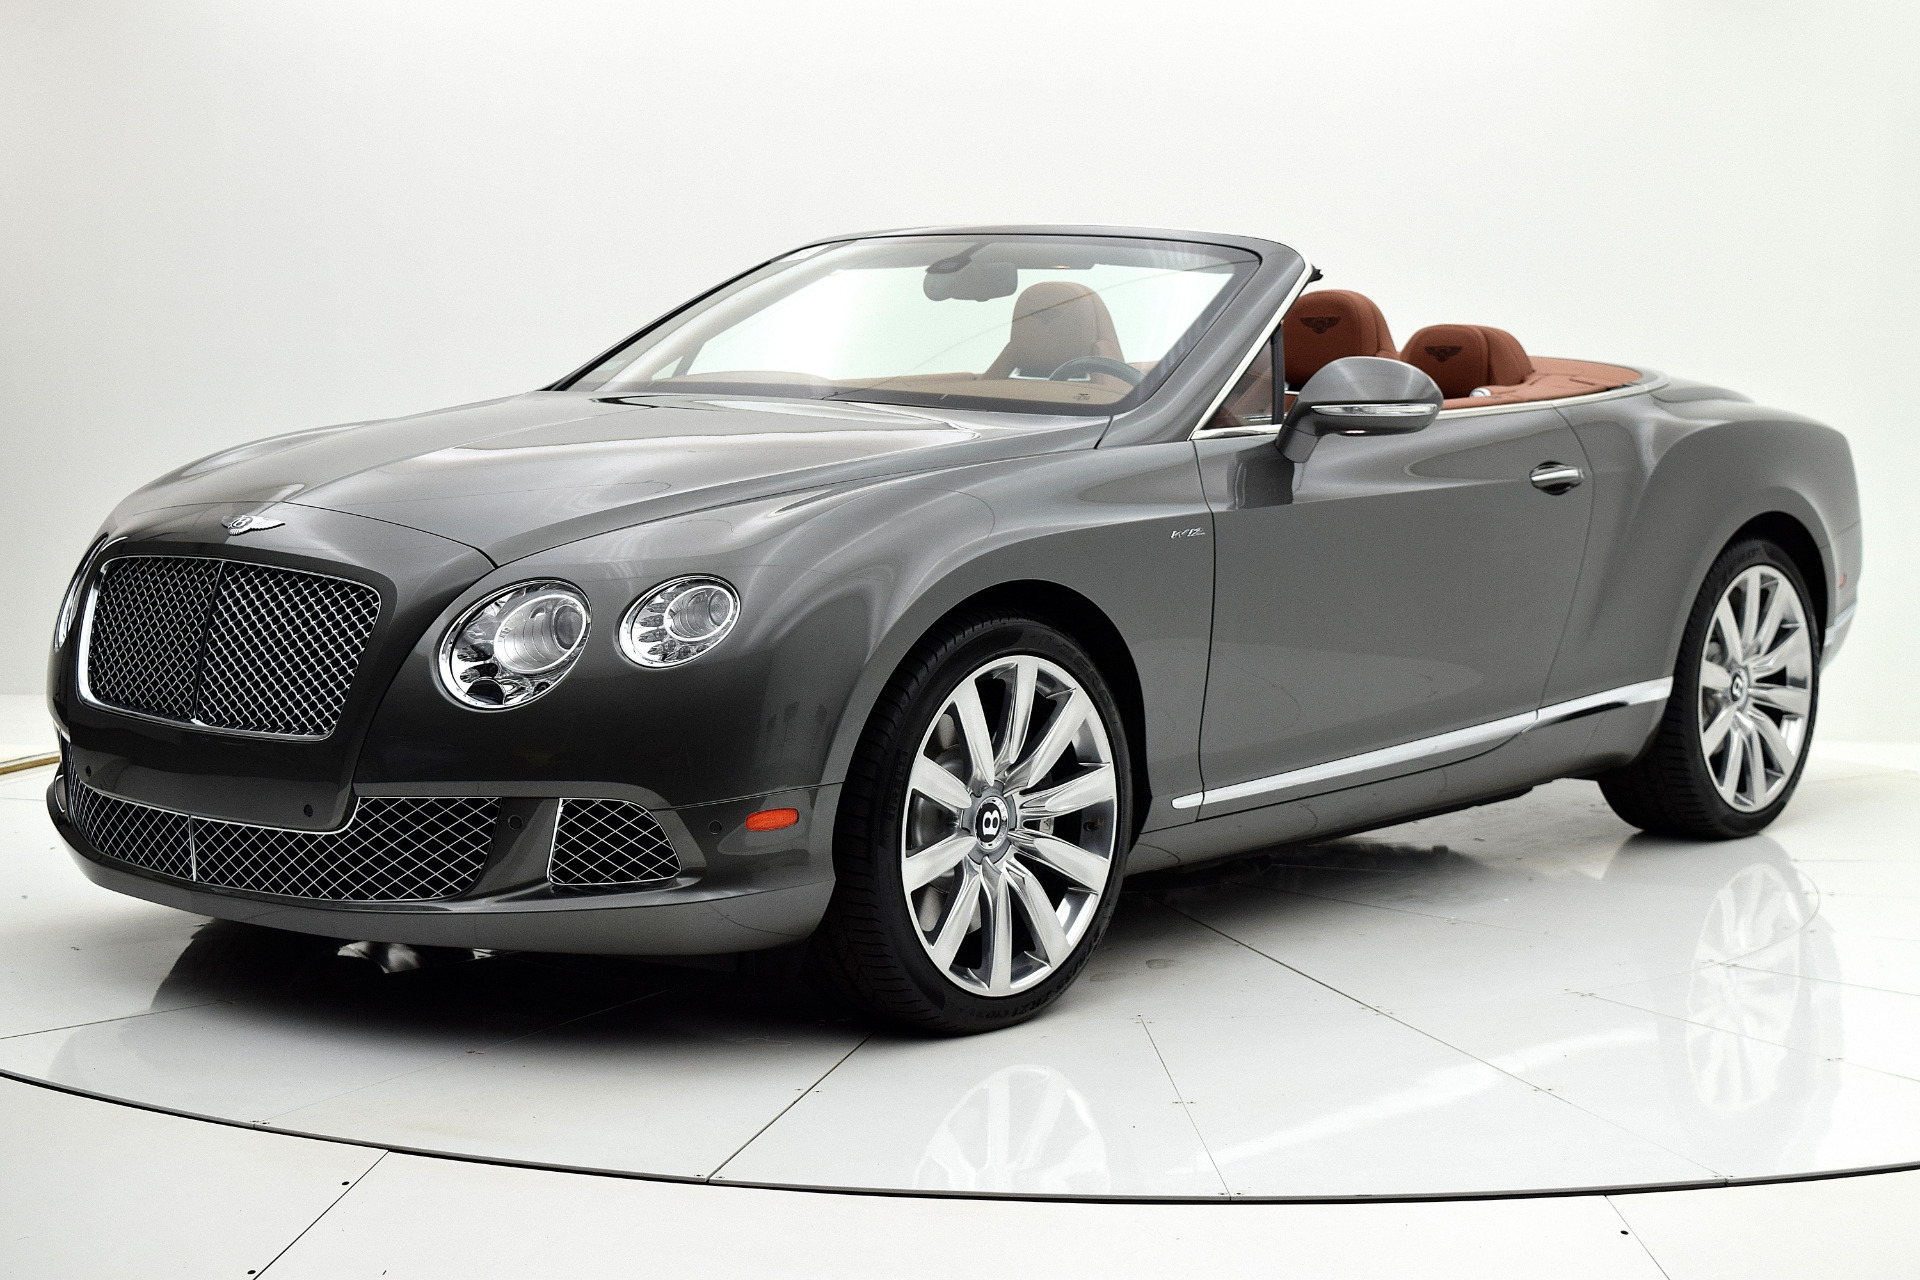 Used 2014 Bentley Continental GT W12 Convertible for sale Sold at Bentley Palmyra N.J. in Palmyra NJ 08065 2